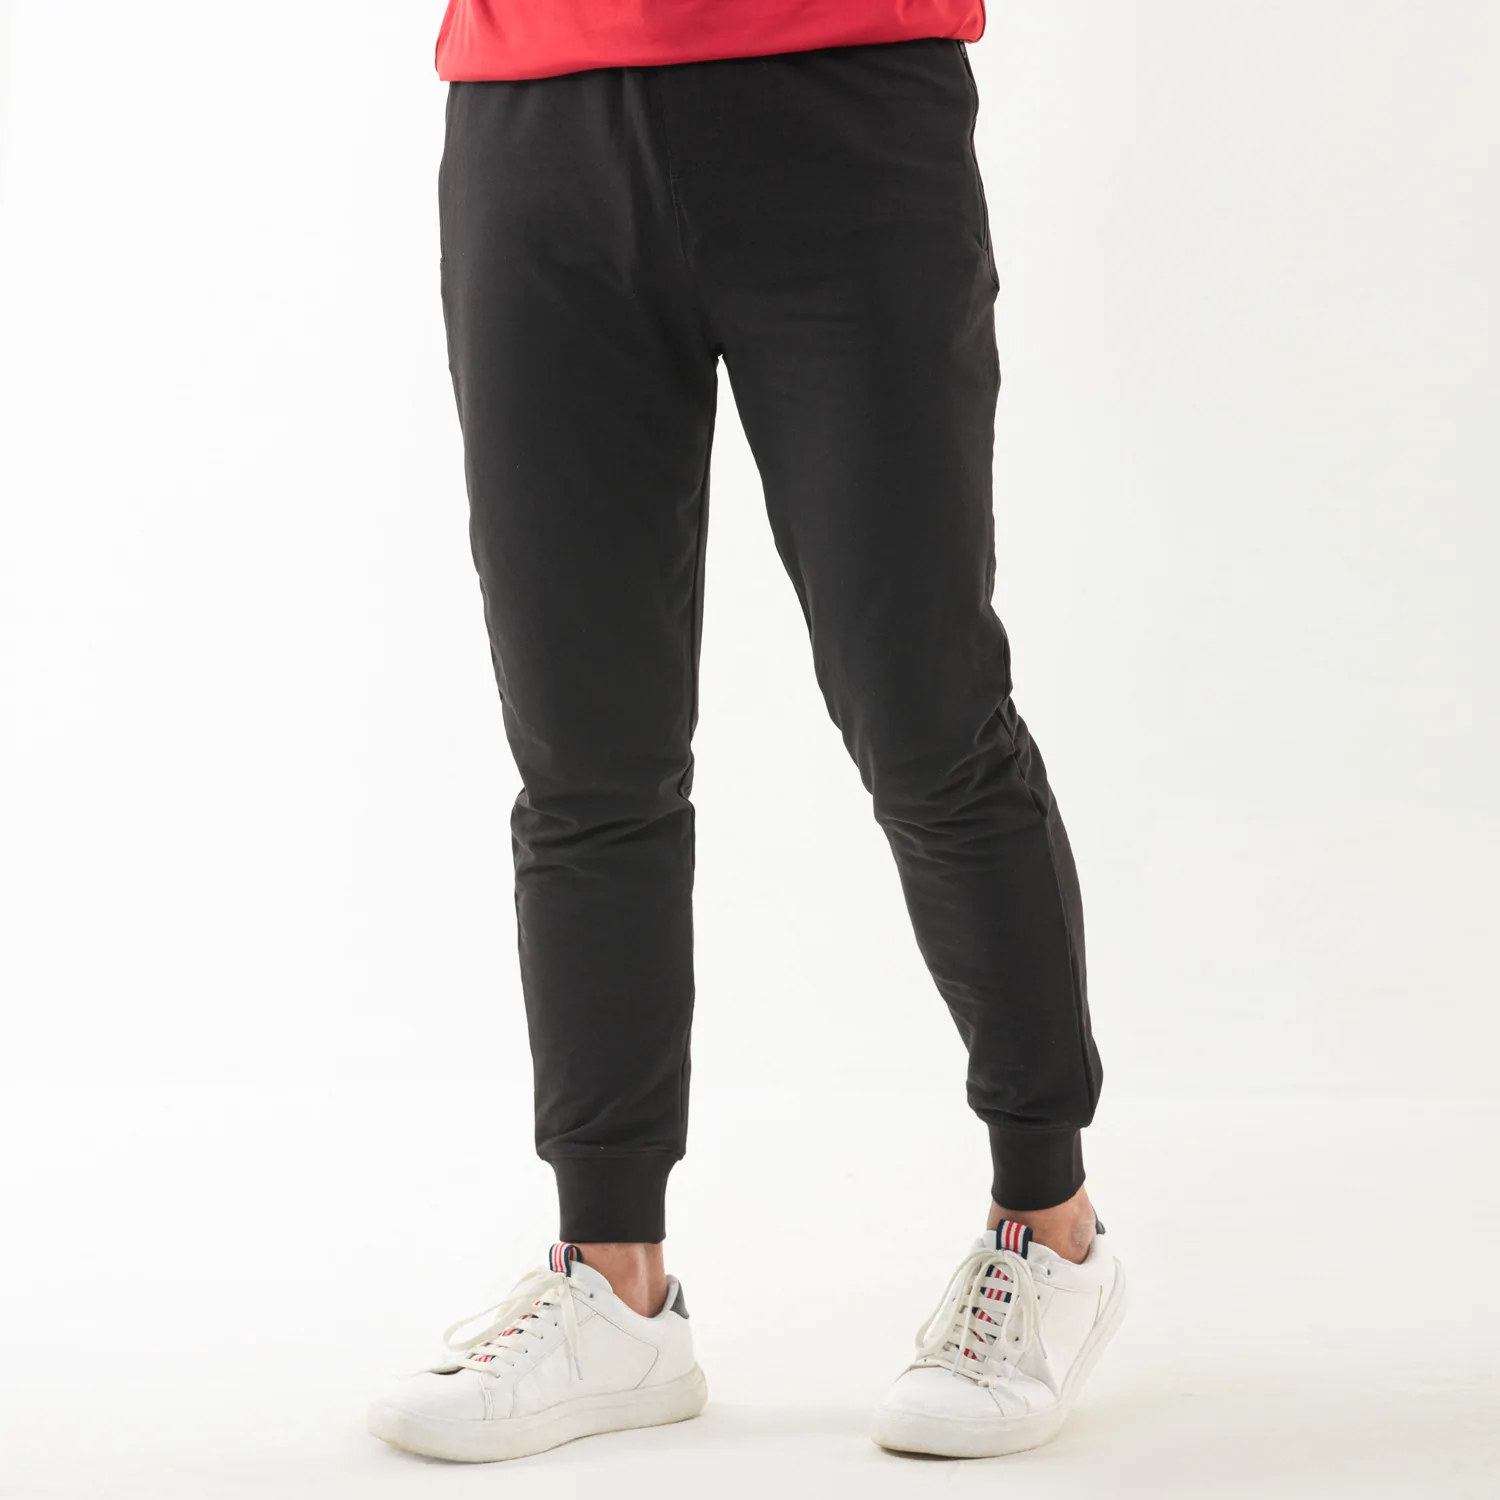 Mens Joggers at Best Price in Bangladesh - Masculine.com.bd